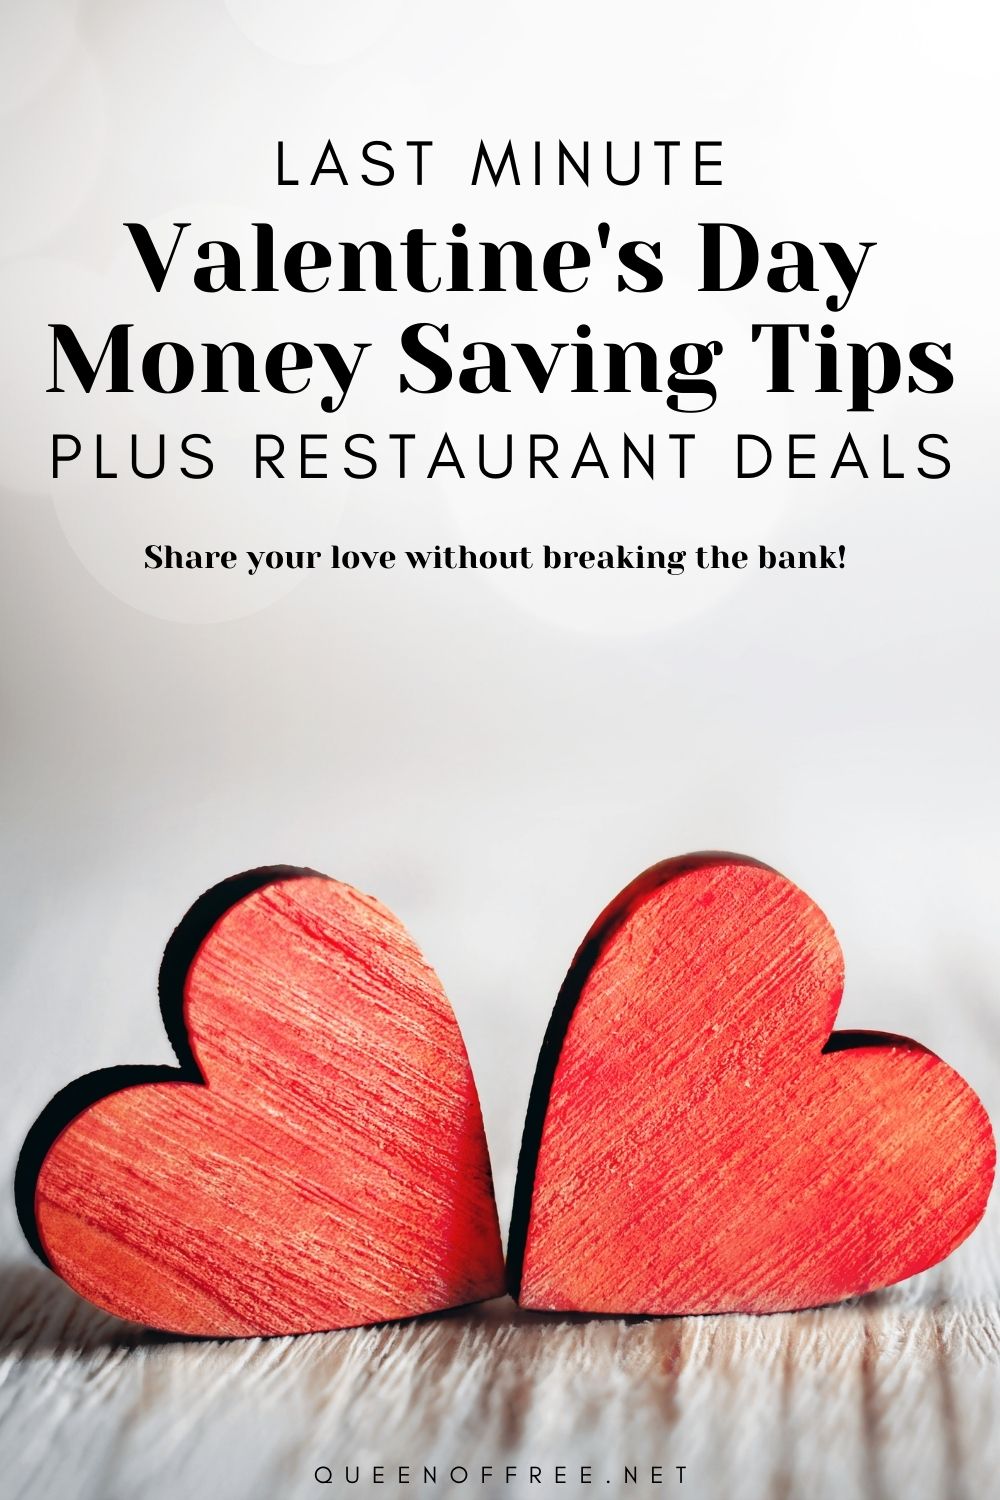 Share your love without breaking the bank! Check out these last minute money saving tips and Valentine's Day Restaurant Deals.